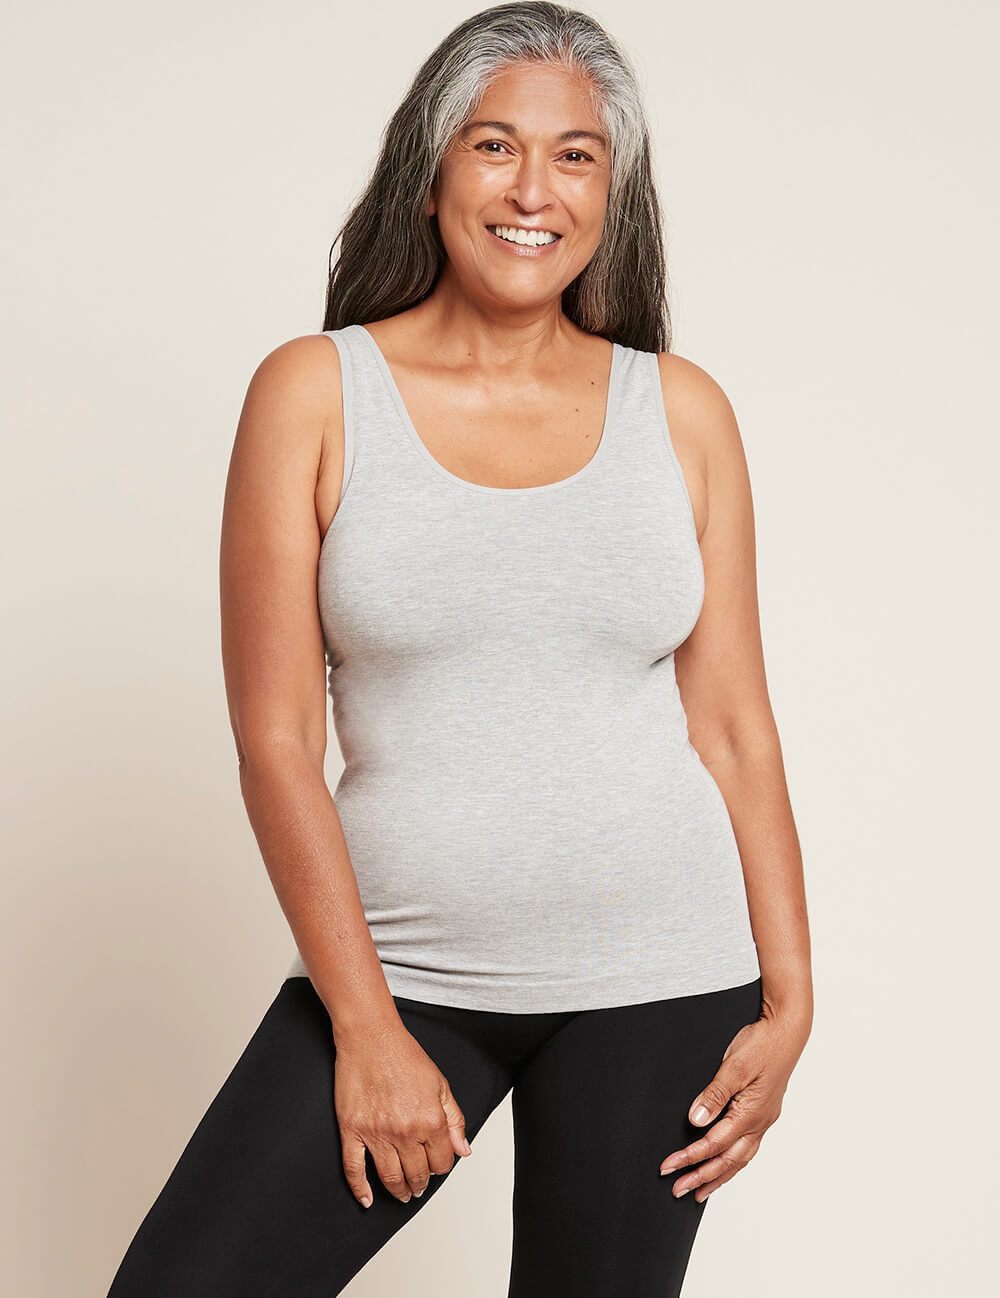 Bamboo Tank Top from Boody Eco Wear - Herbs from the Labyrinth